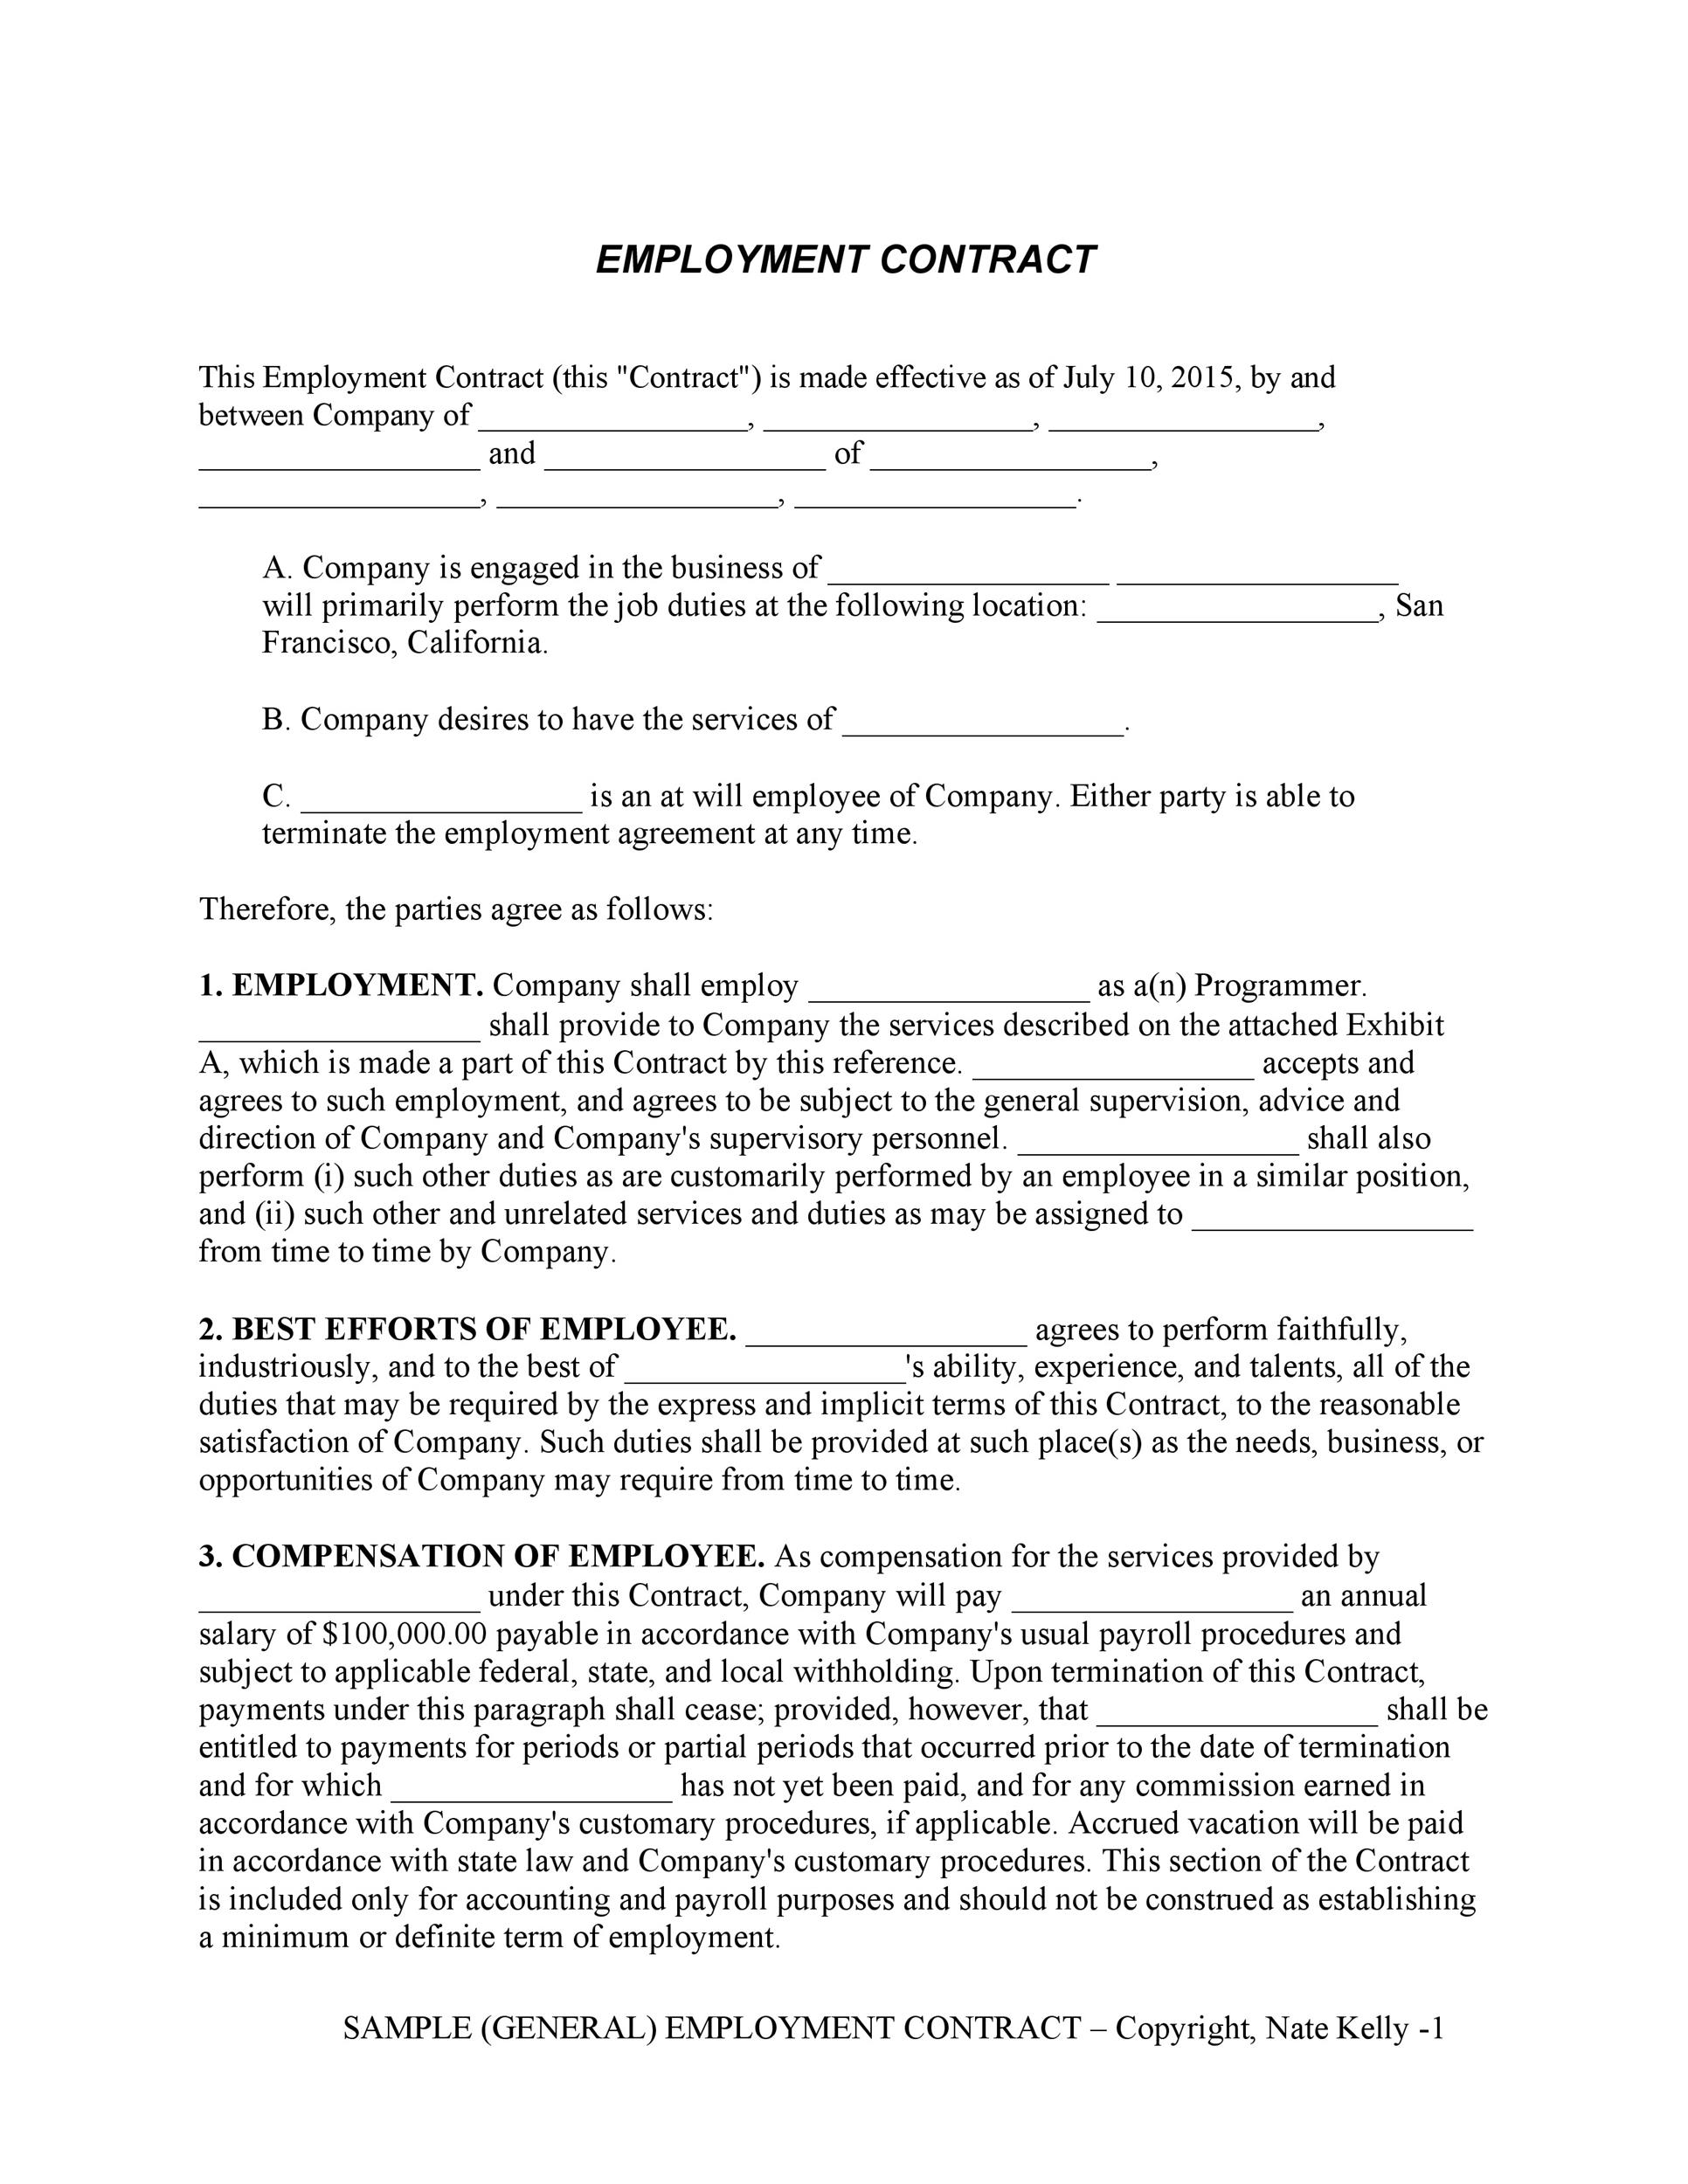 Employment Contract Template New York